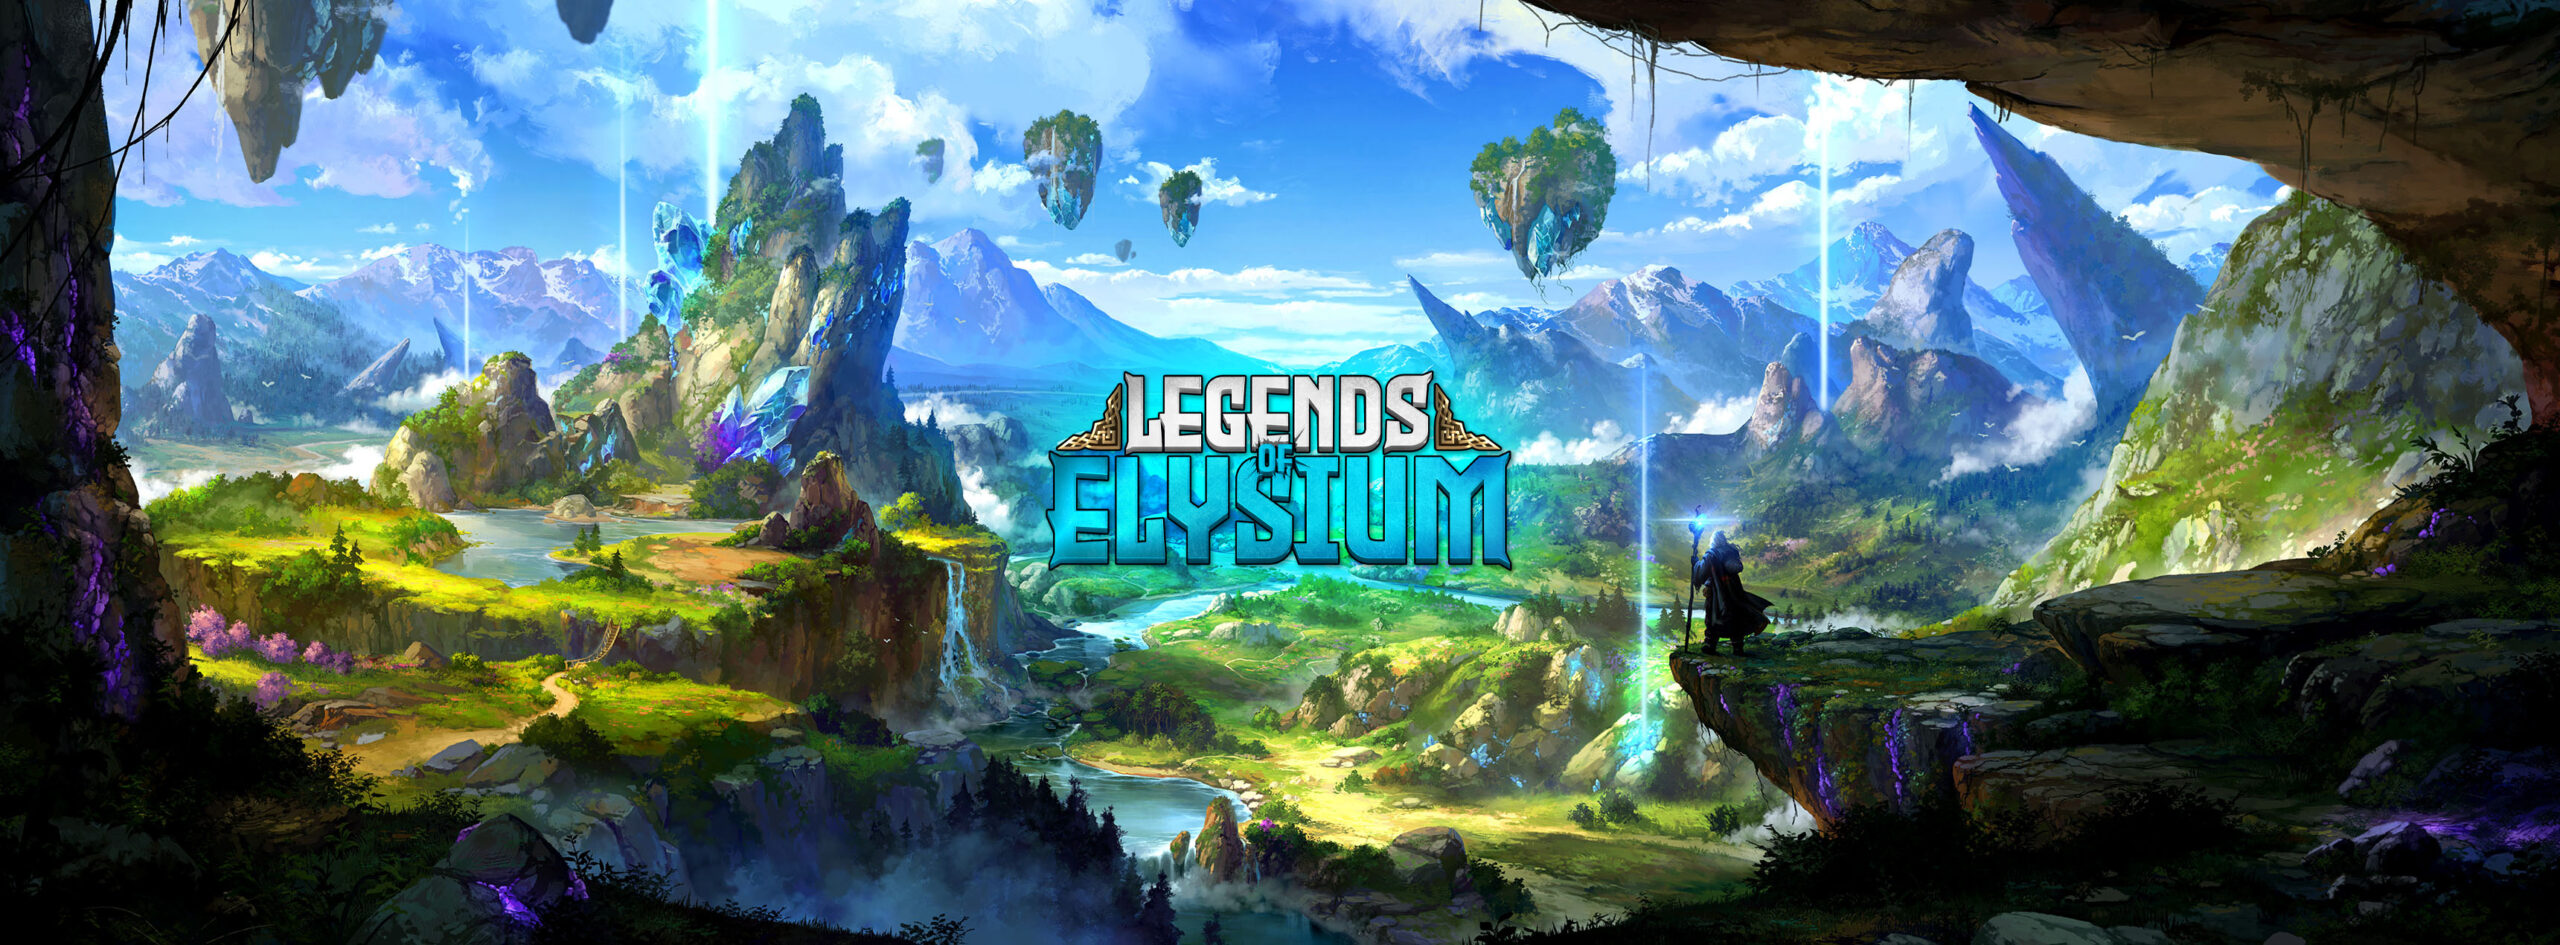 Legends of Elysium Brings Unique Mix of Trading Card Game, Board and Strategy int TCG Sector